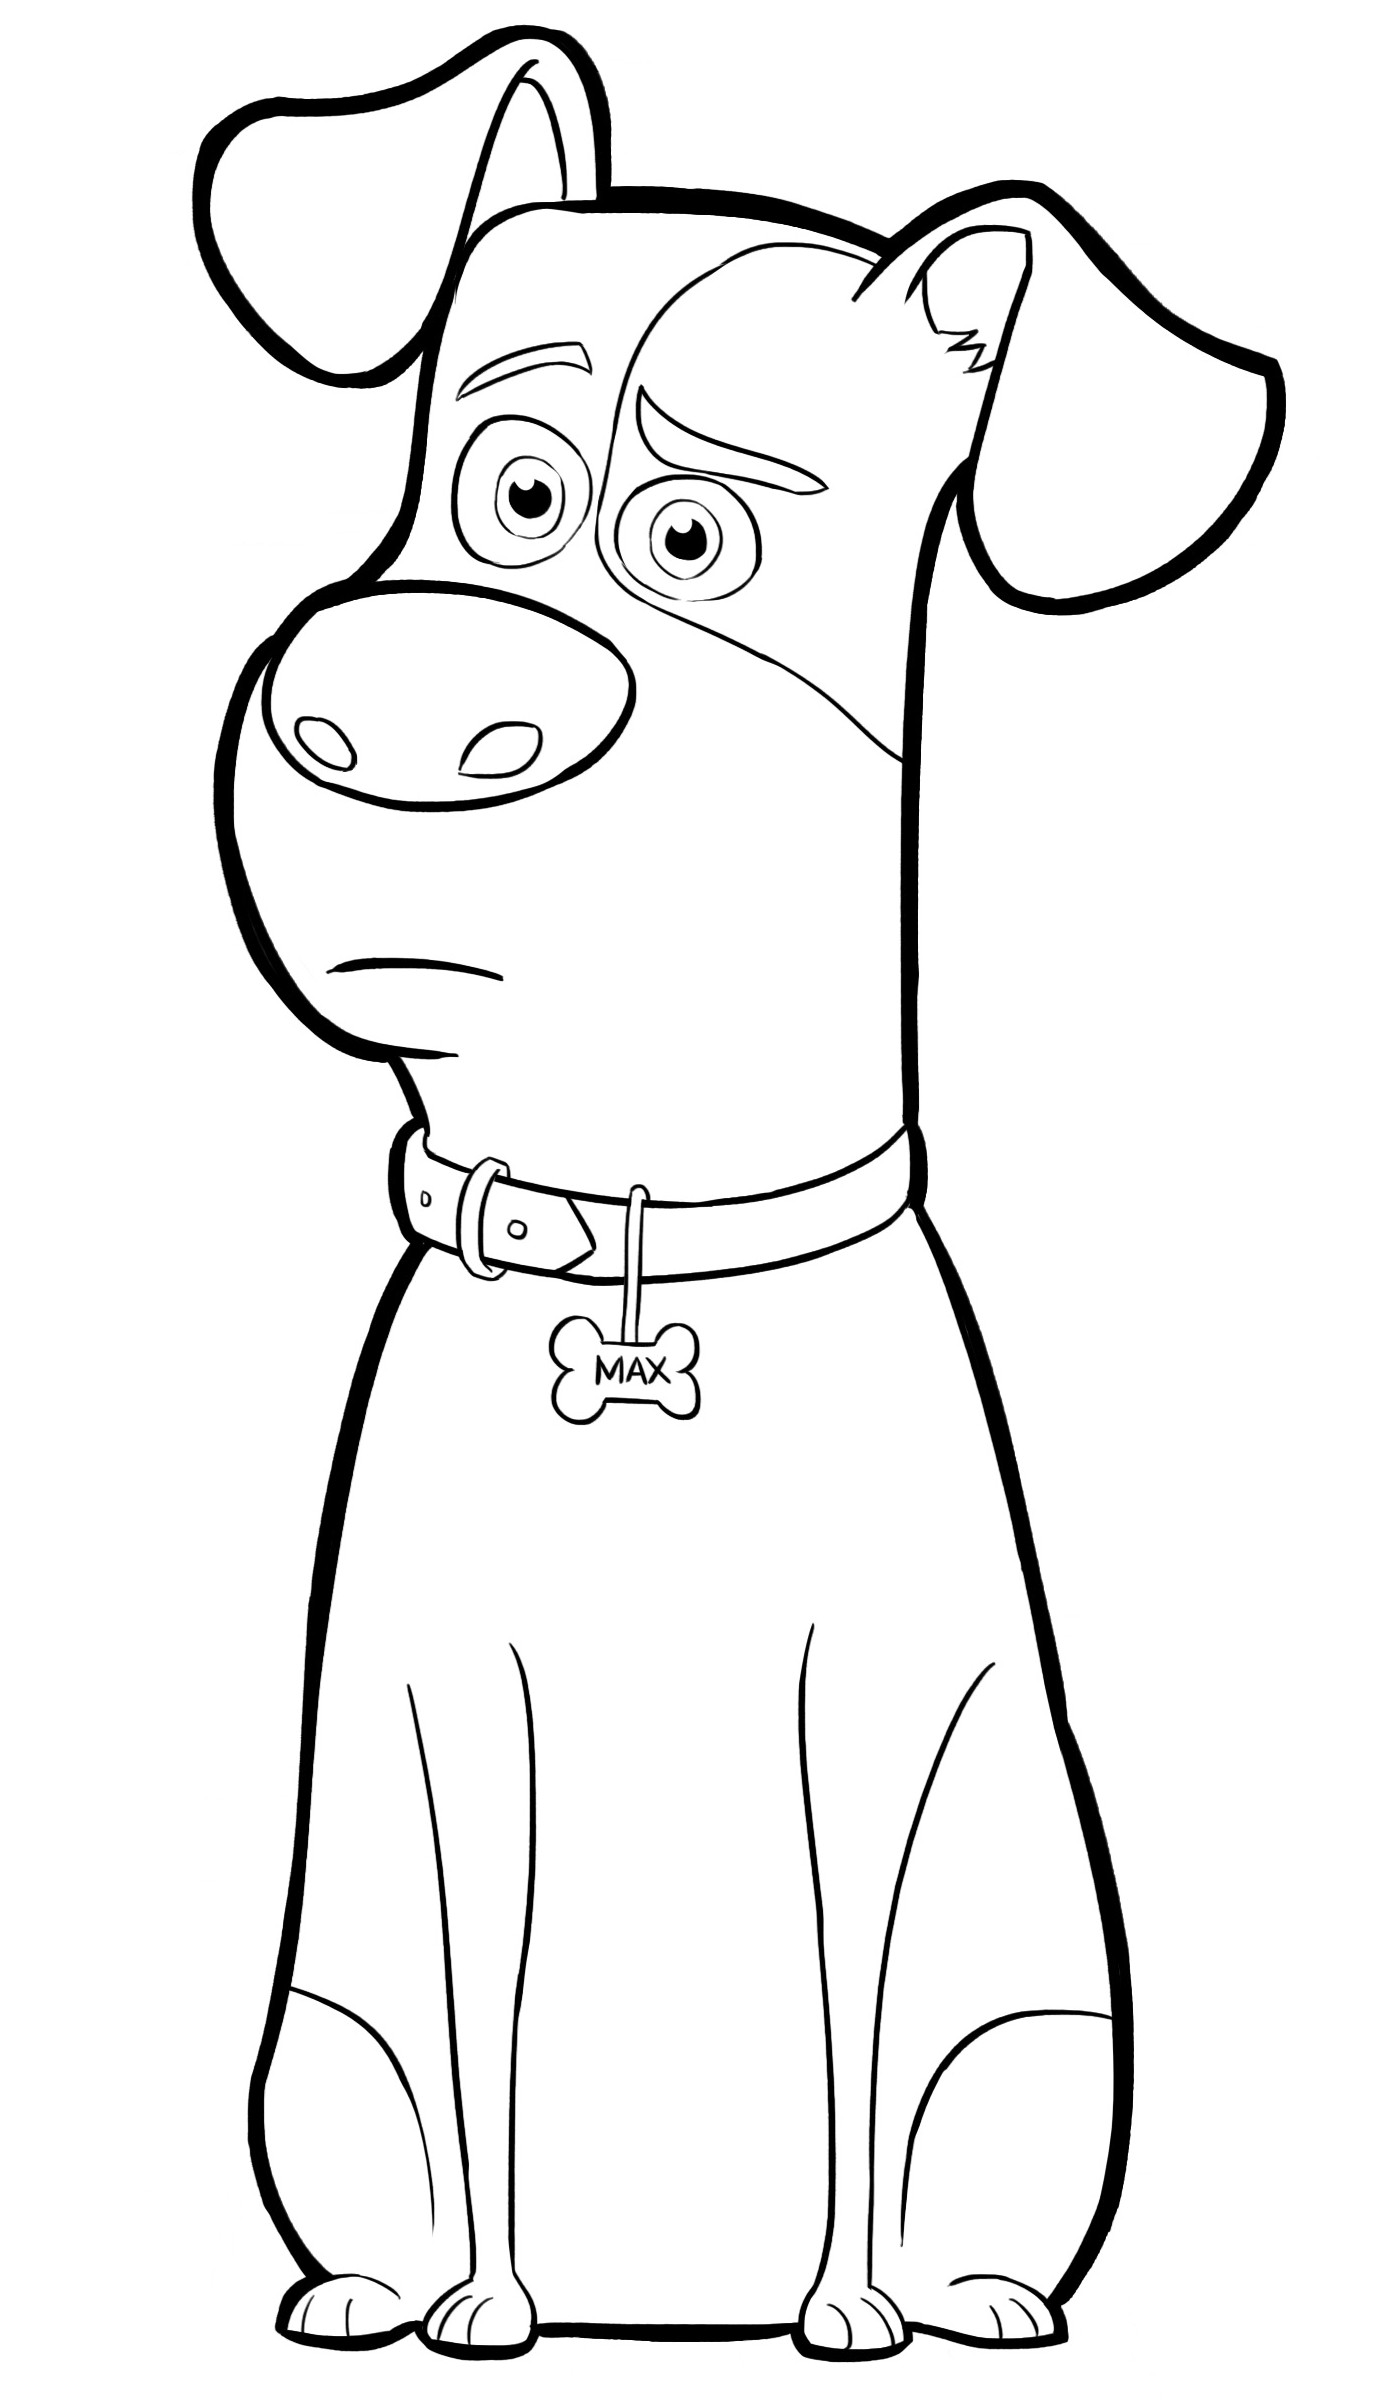 Coloring Book For Kids Online
 Pets Coloring Pages Best Coloring Pages For Kids